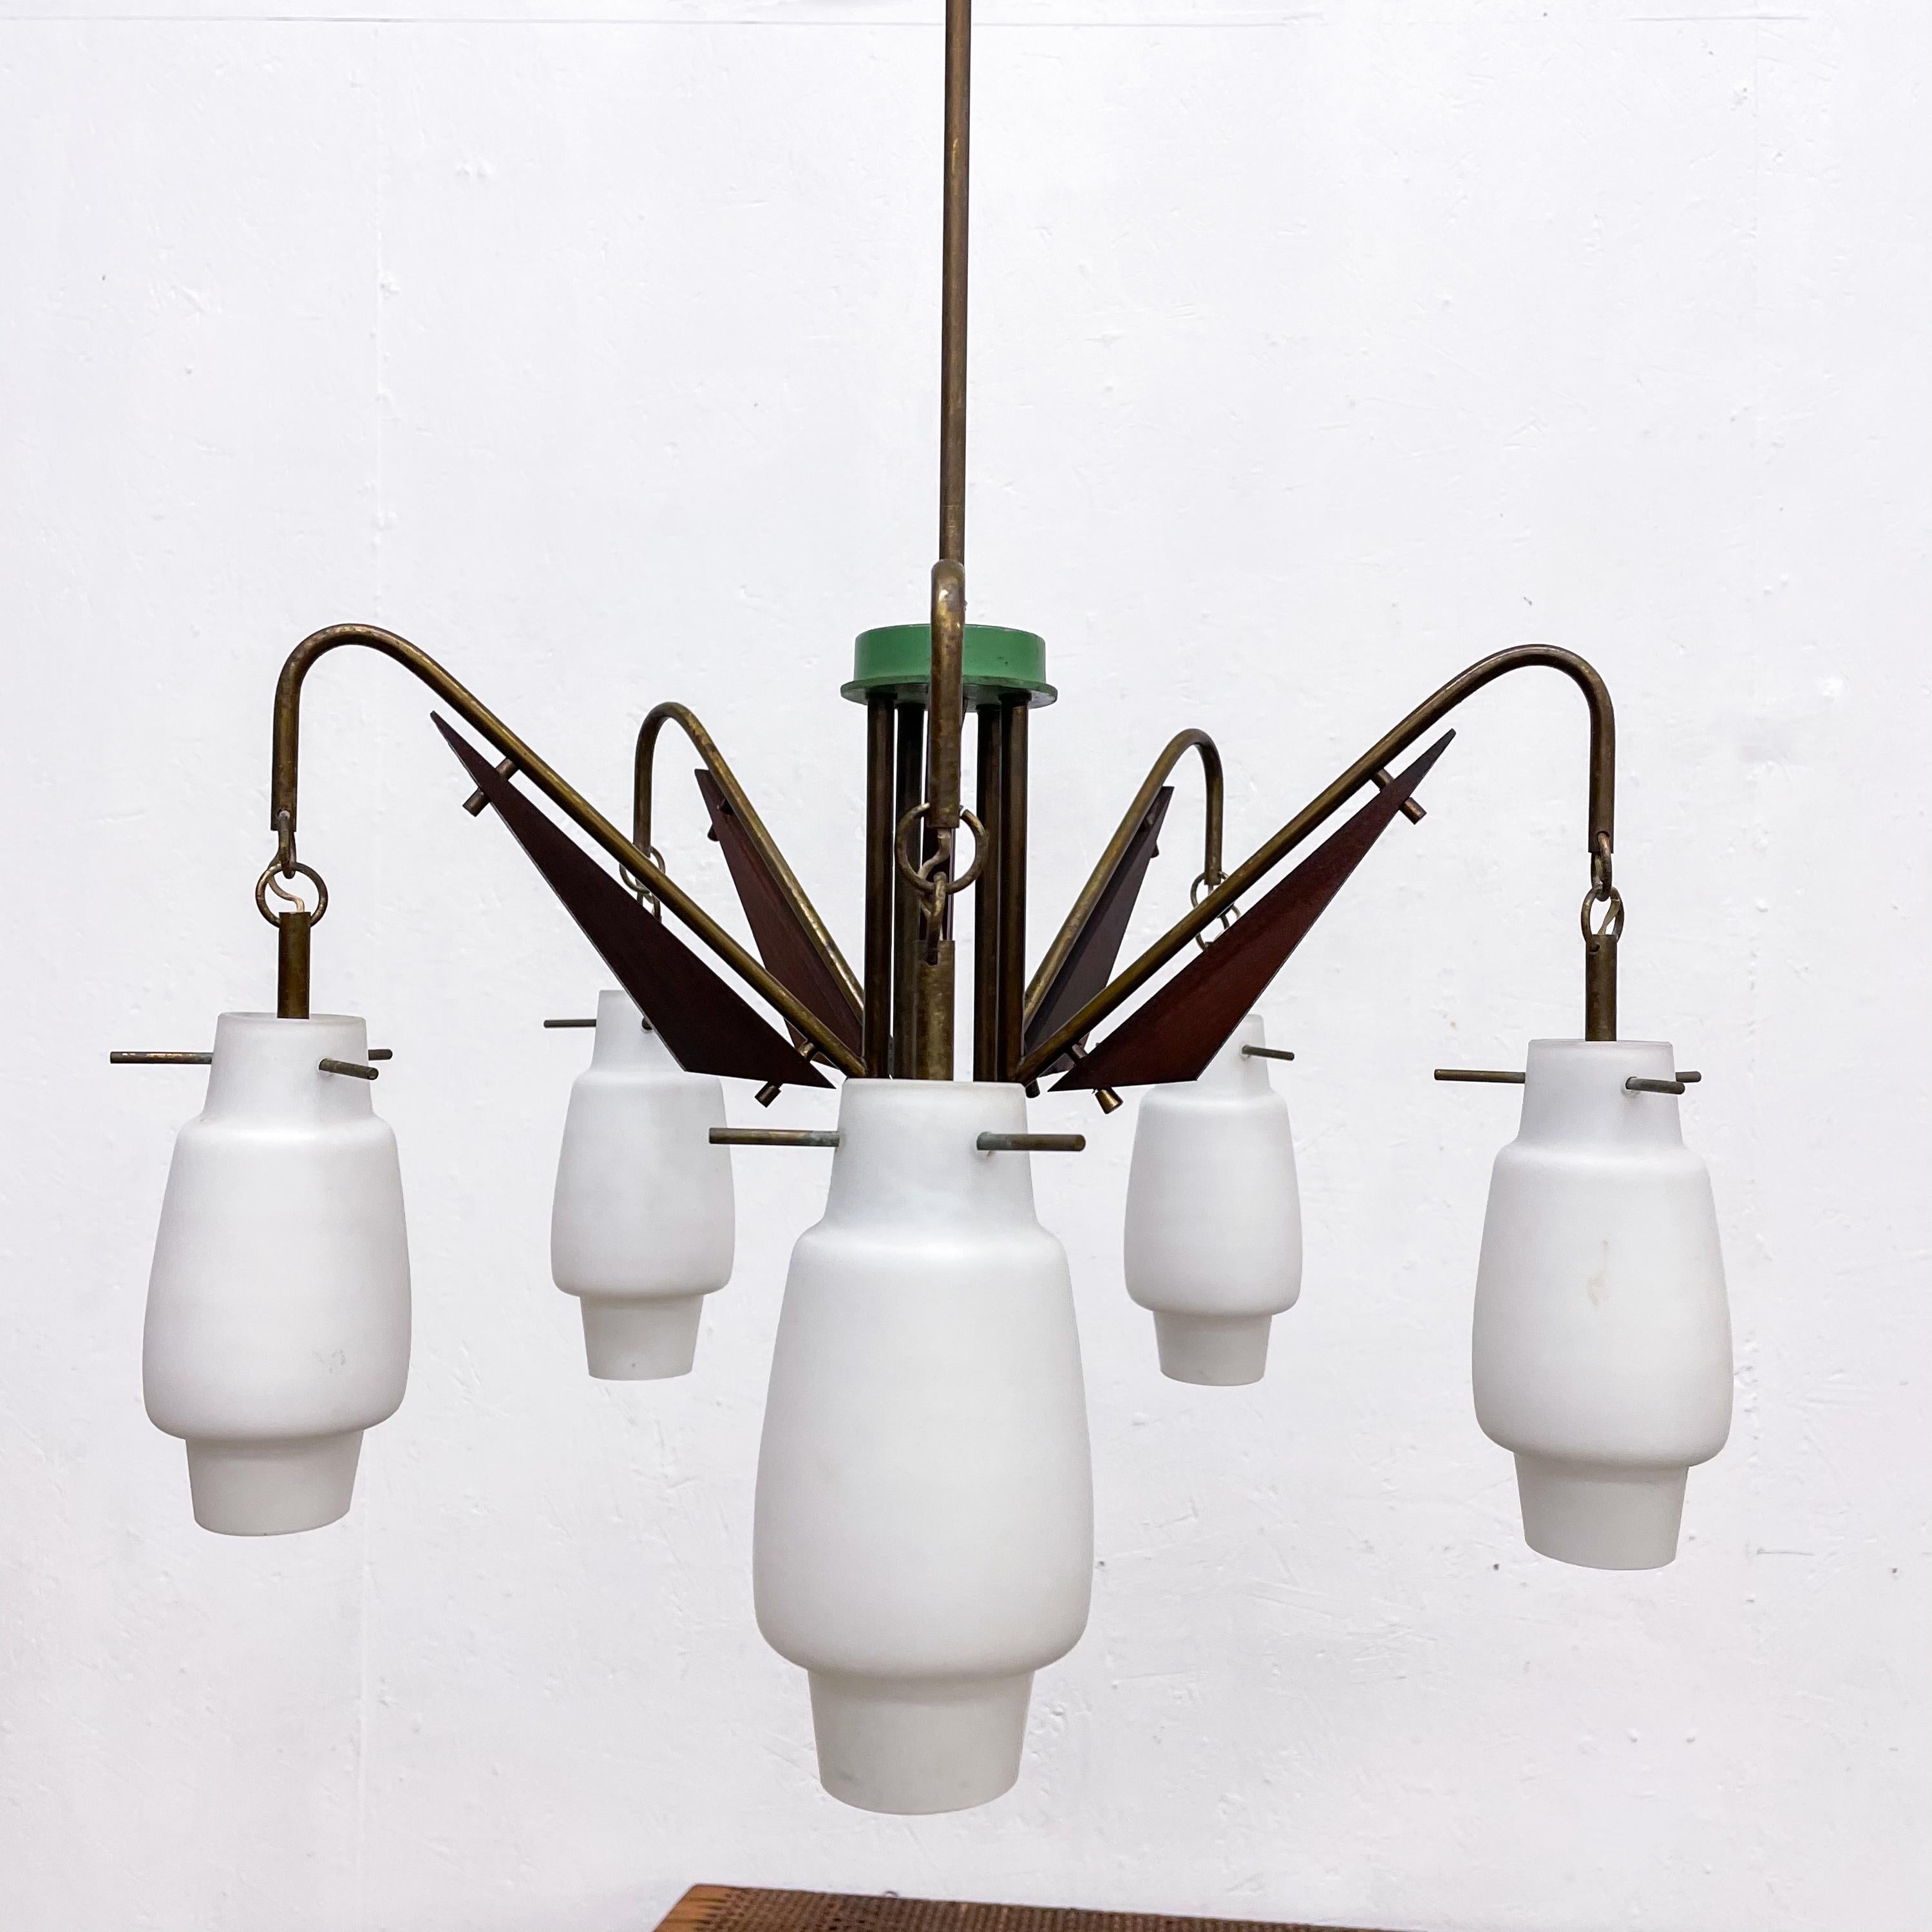 Stilnovo Five arm Chandelier with Green Accent.  Made in Italy circa 1950s
No label, attributed Stilnovo.
Brass and Wood with Opaline Case Glass. 
Original Unrestored Vintage condition.
Tested and currently working. It requires 5 e-14 torpedo bulbs